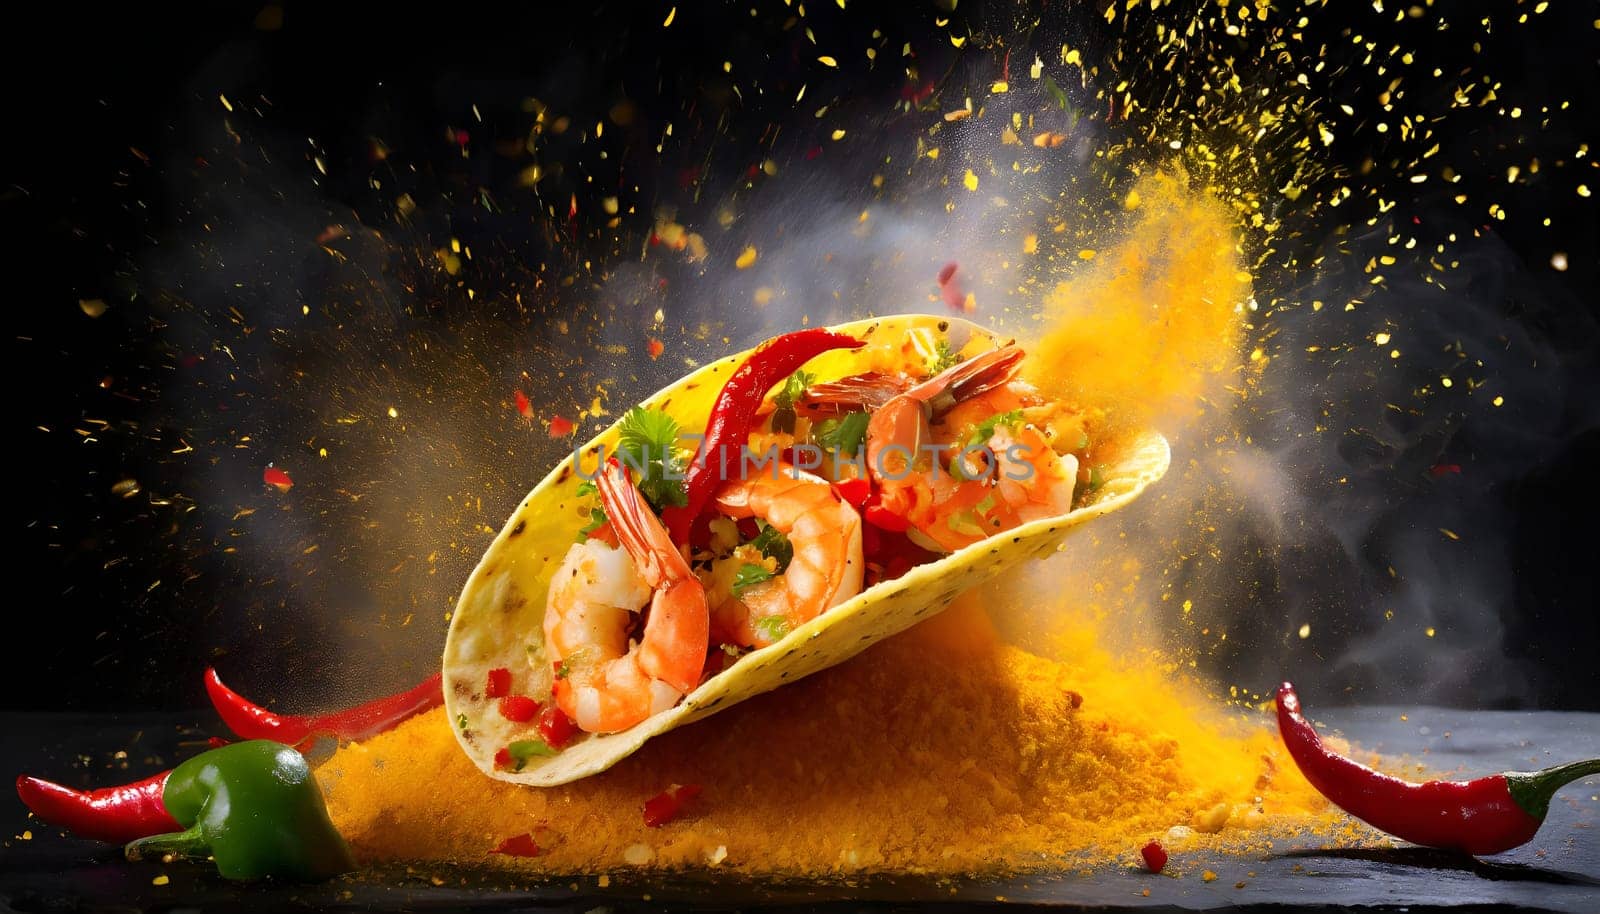 Powerful explosion of yellow dust from a shrimp taco. Falling tacos. High quality photo